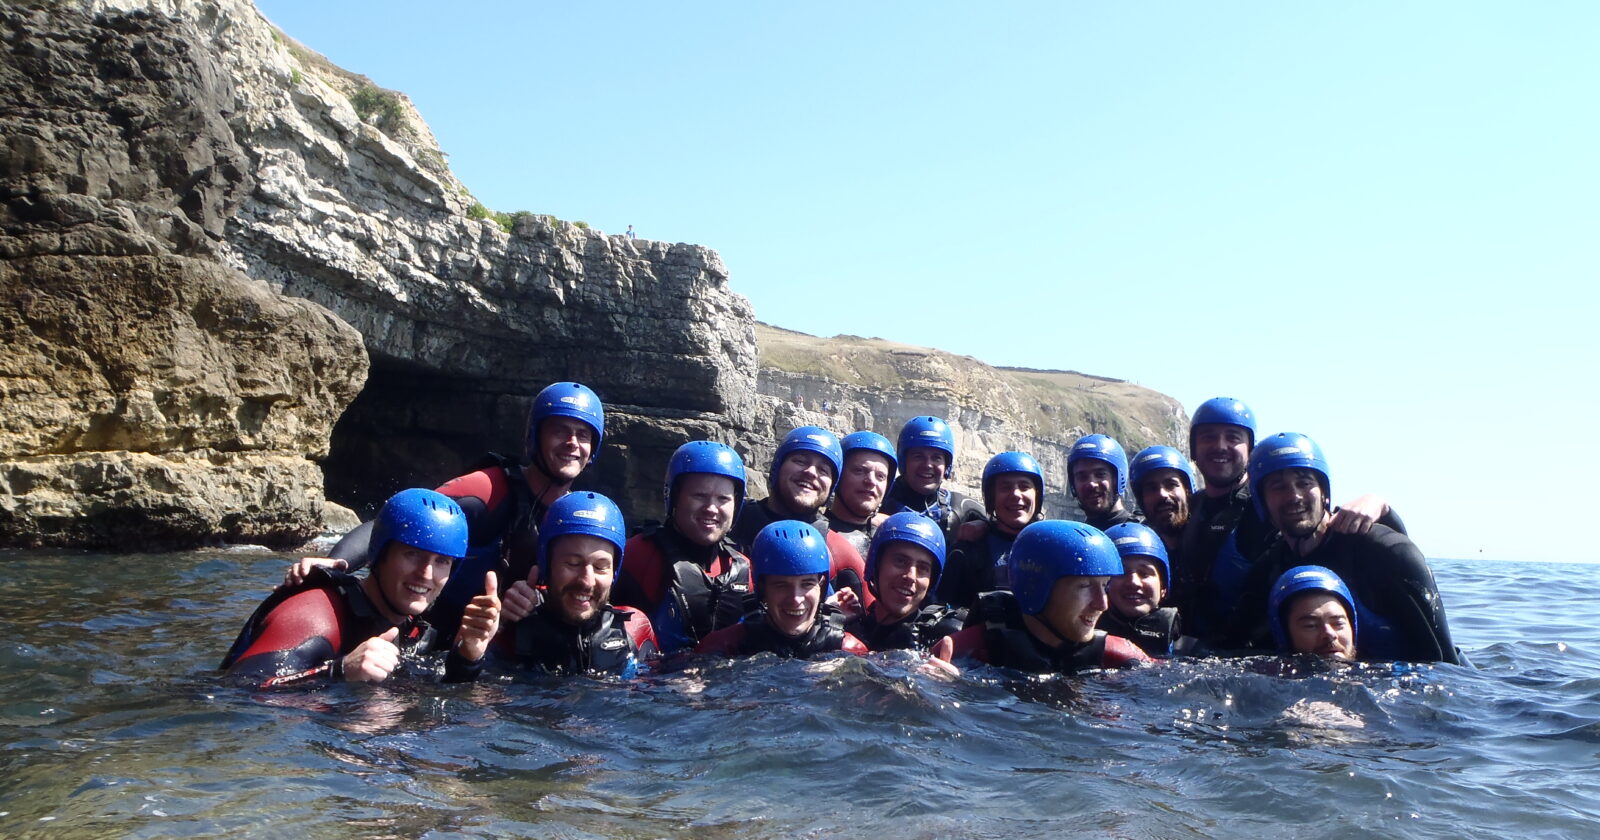 Stag Group coasteering at Dancing Ledge in Dorset